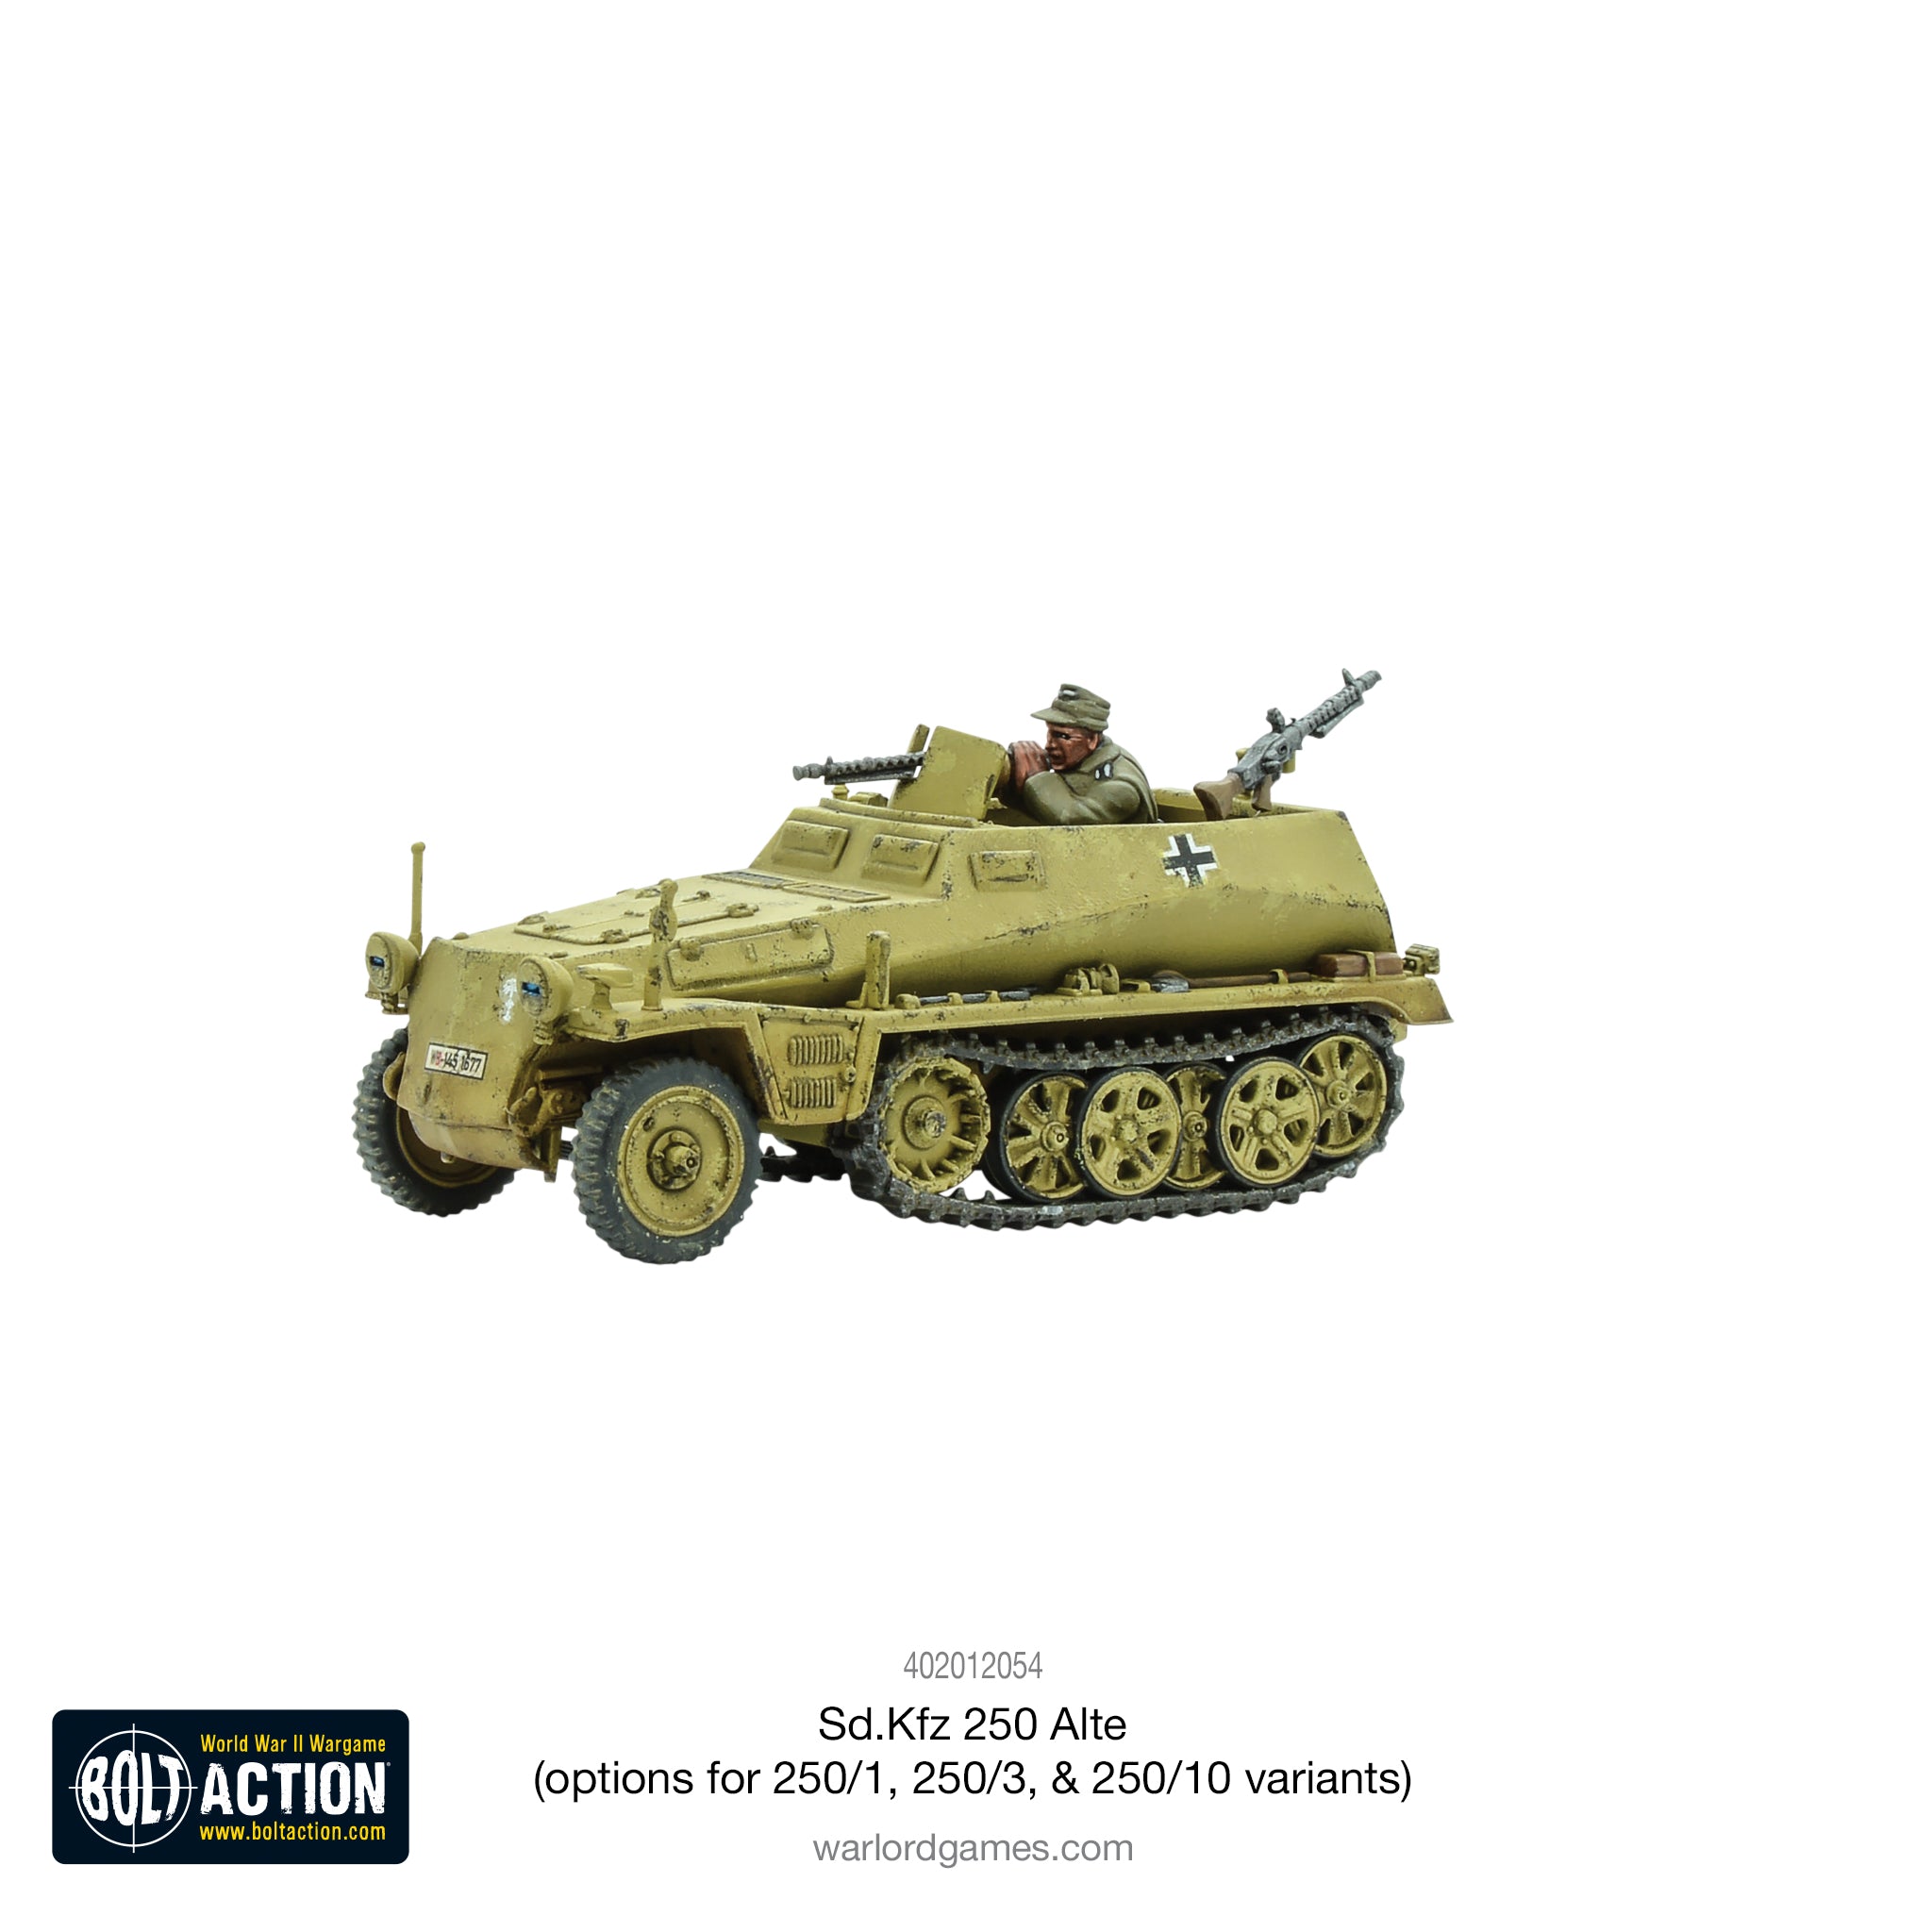 Sd.Kfz 250 (Alte) half-track (options to make 250/1, 250/3 or 250/10 variants)